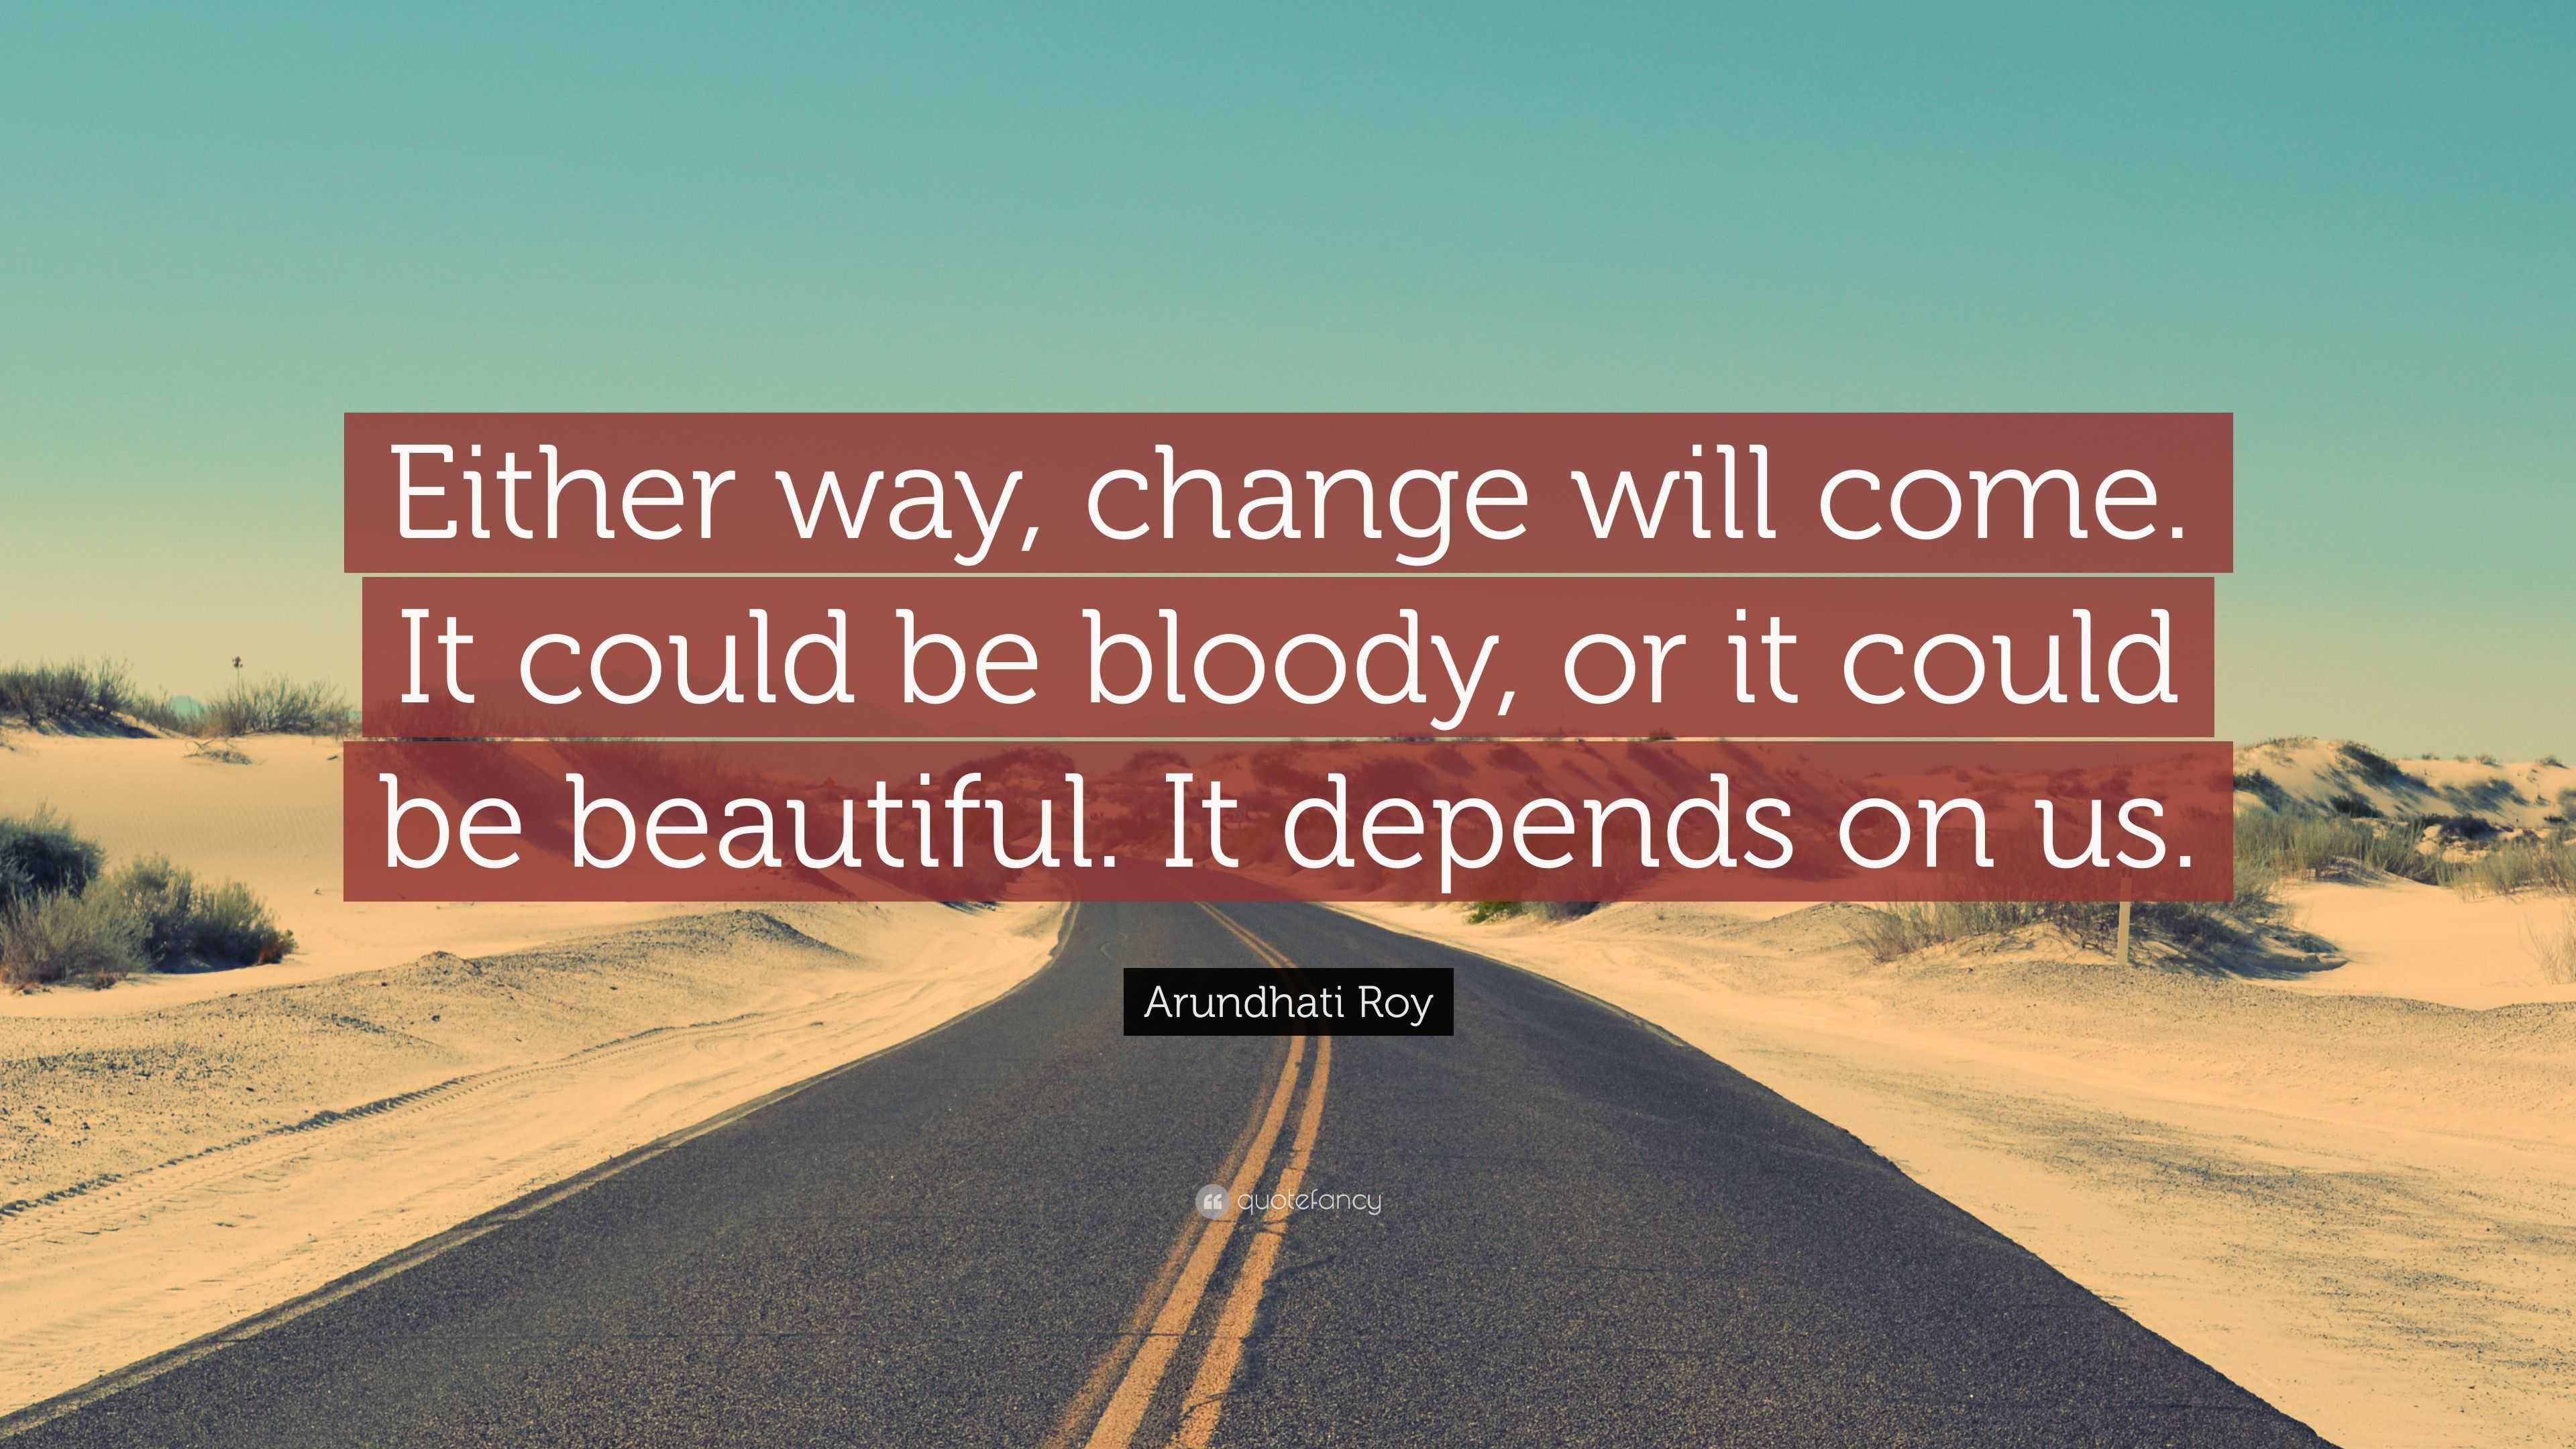 Arundhati Roy Quote: “Either way, change will come. It could be bloody ...